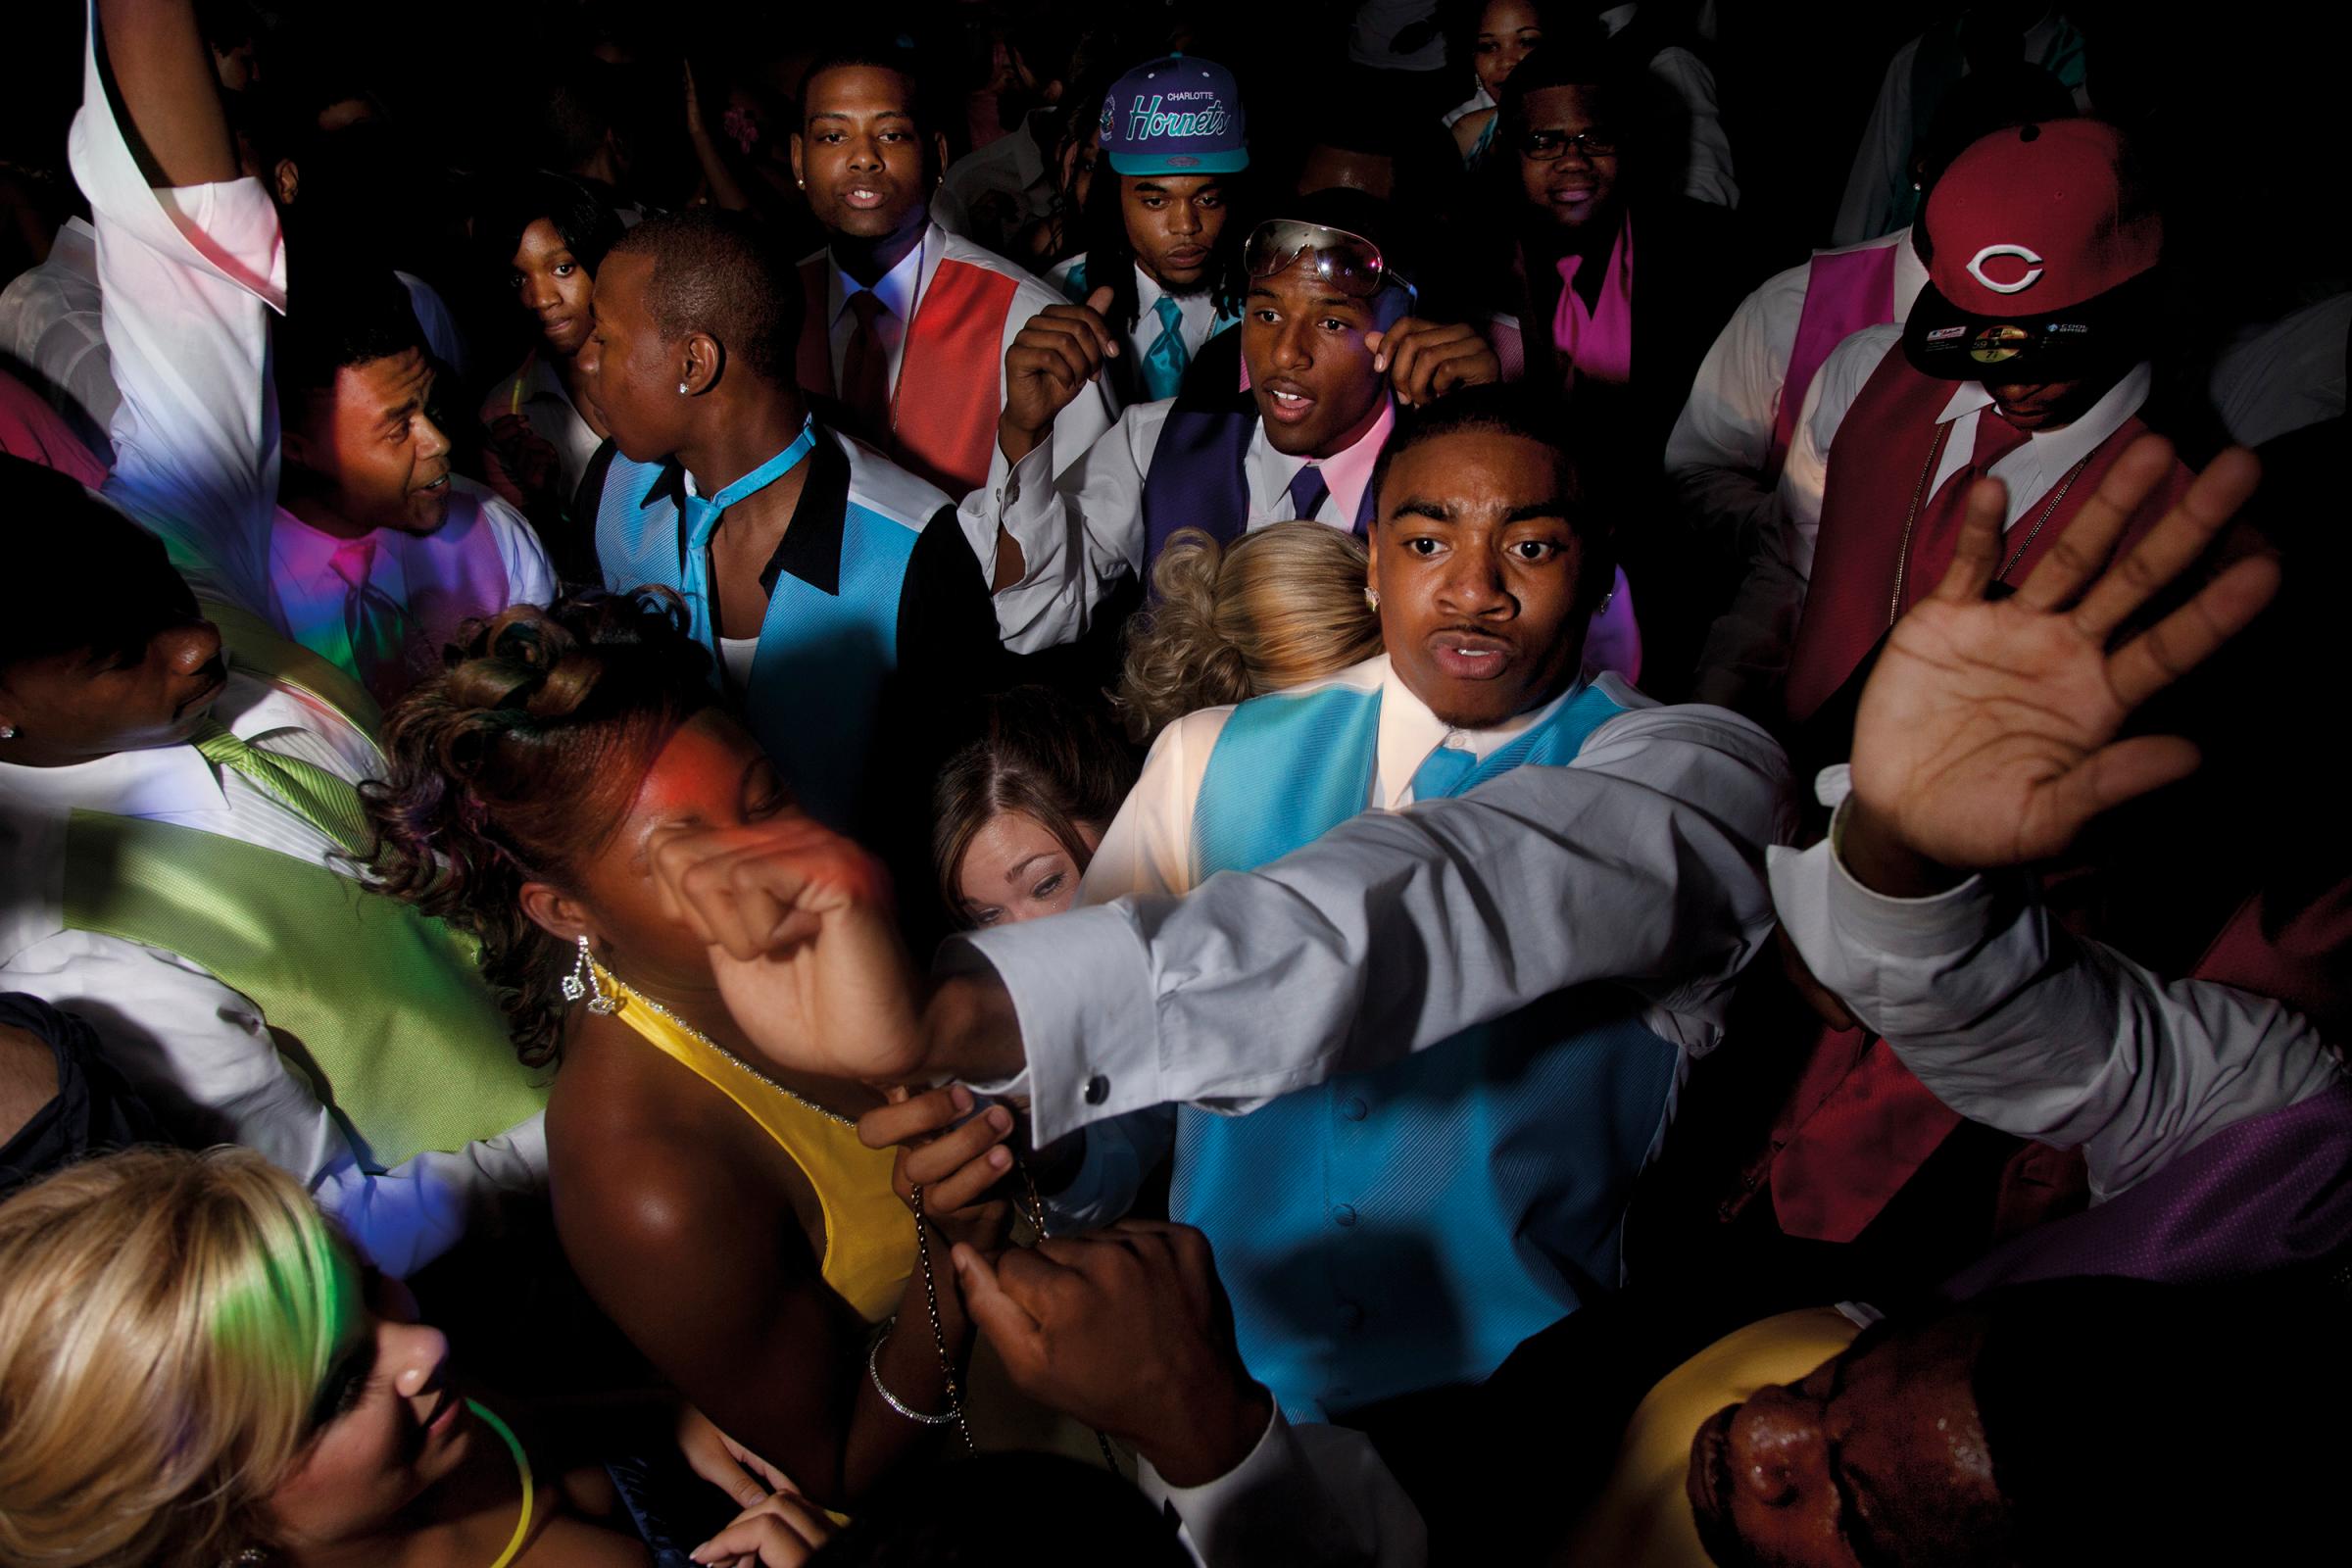 Dance floor at the integrated prom, 2011